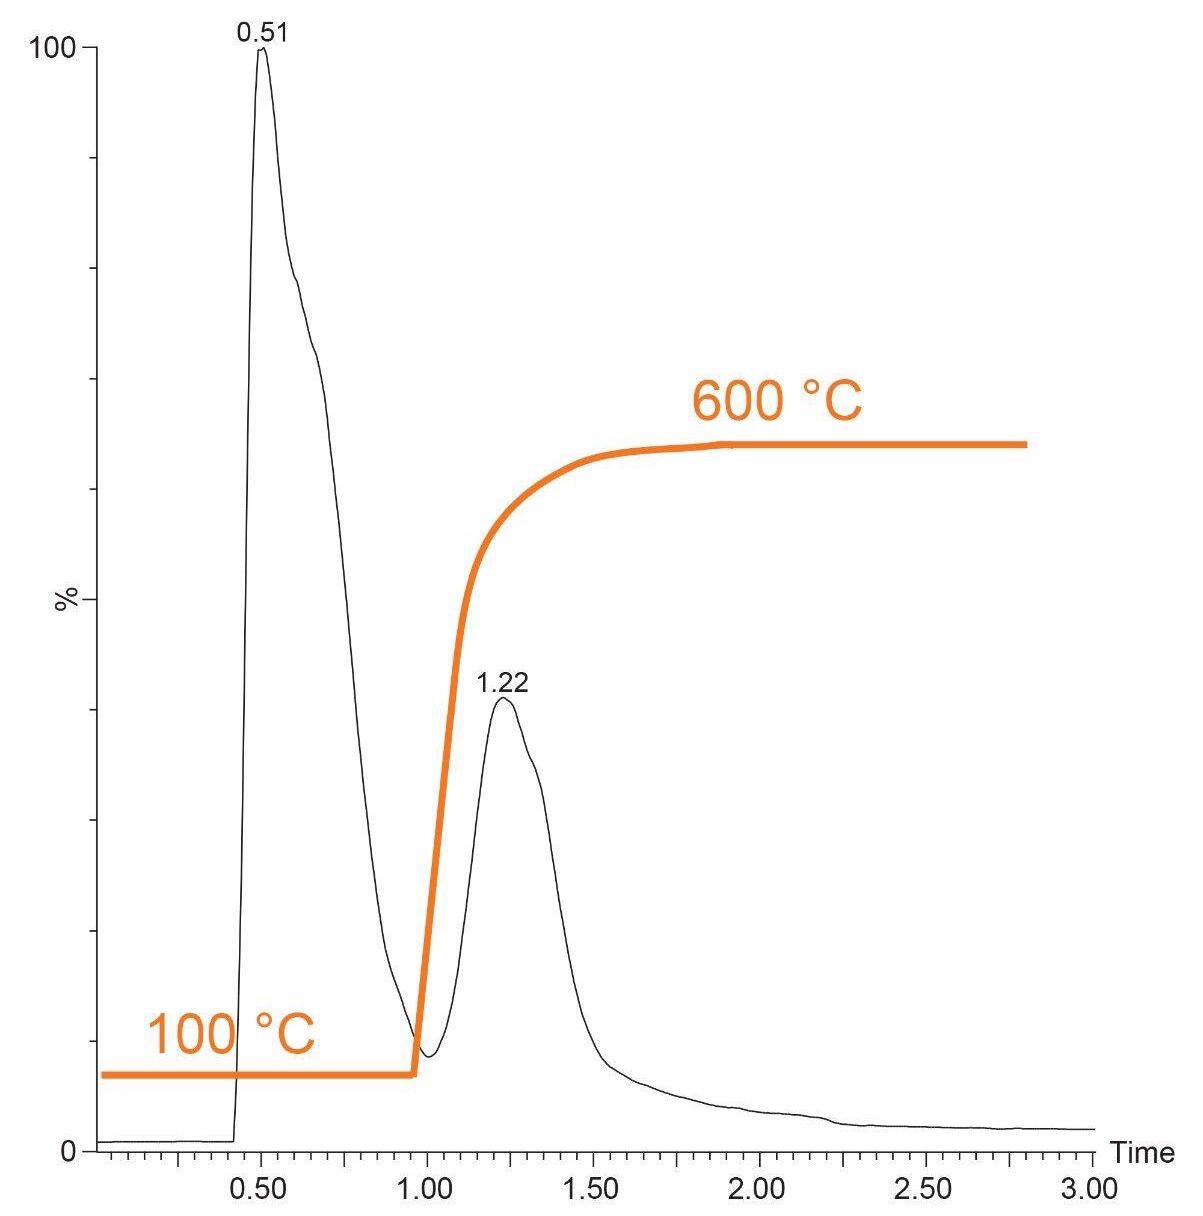 The thermal desorption profile (black line) resulting from the temperature ramp, with an overlay showing the temperature gradient profile (orange line).